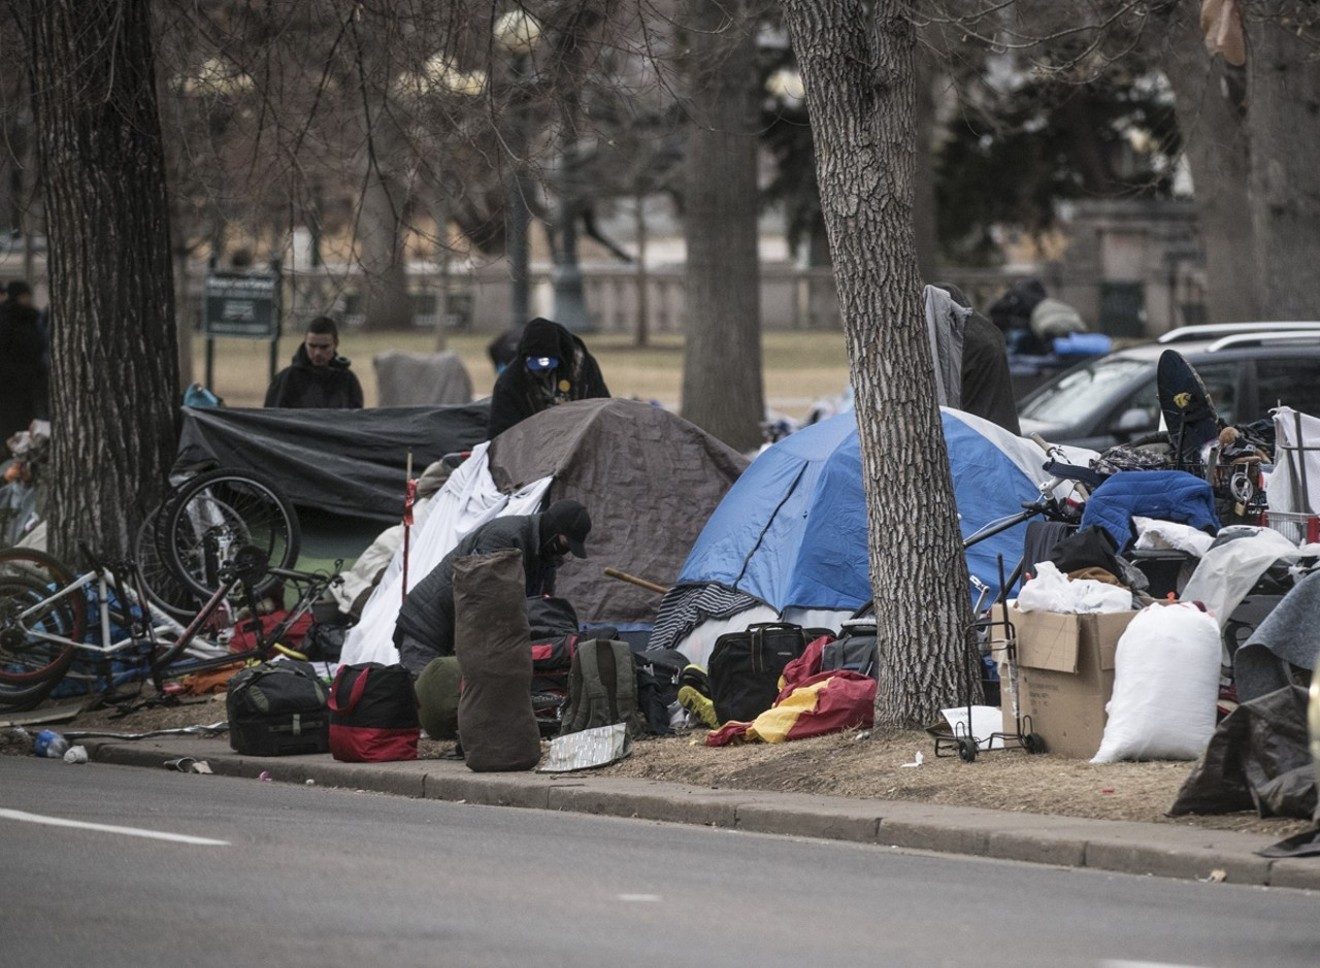 The City of Denver wants to engage in "encampment decommissioning."